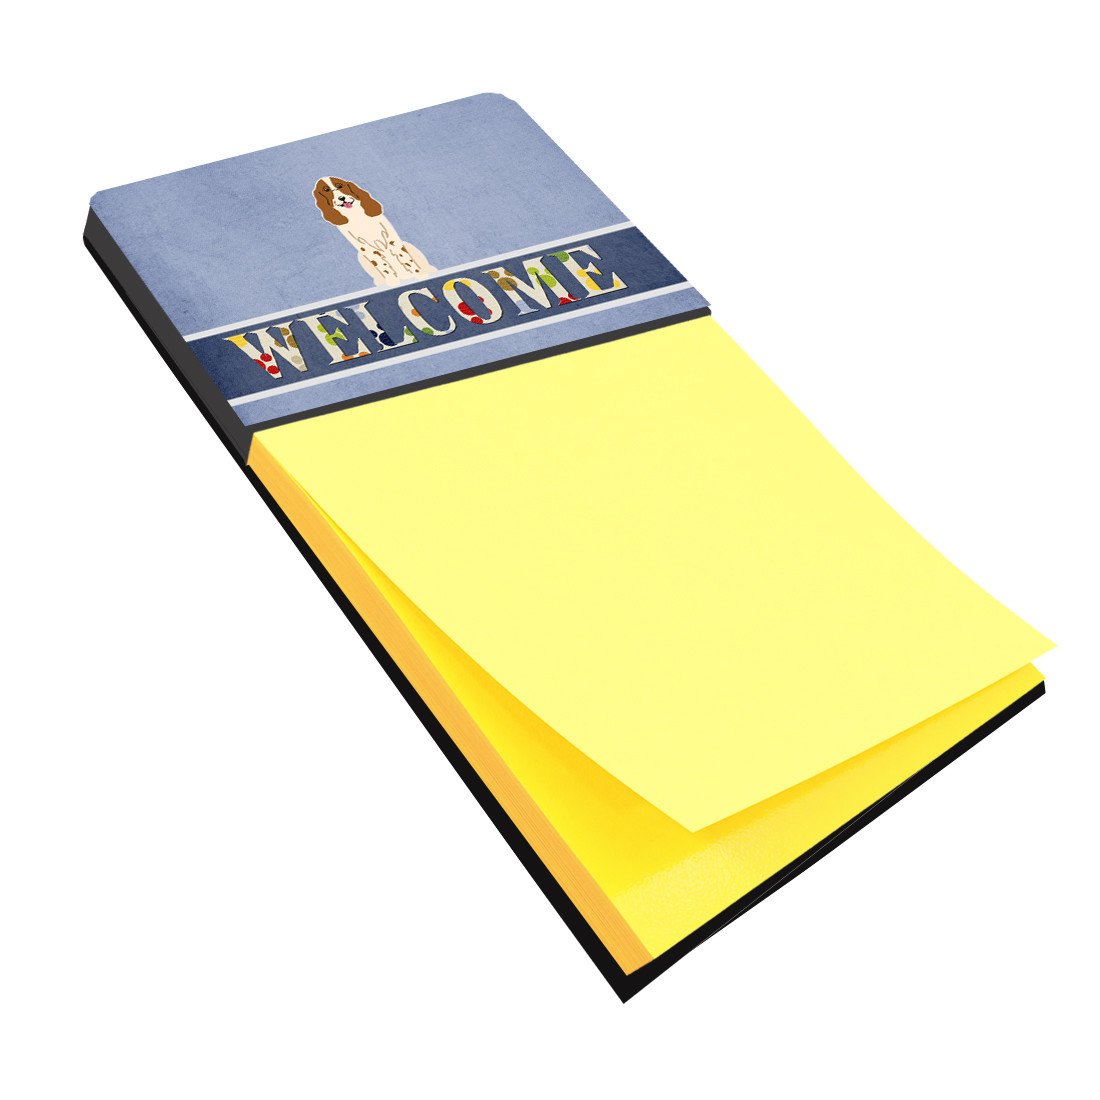 Russian Spaniel Welcome Sticky Note Holder BB5612SN by Caroline's Treasures